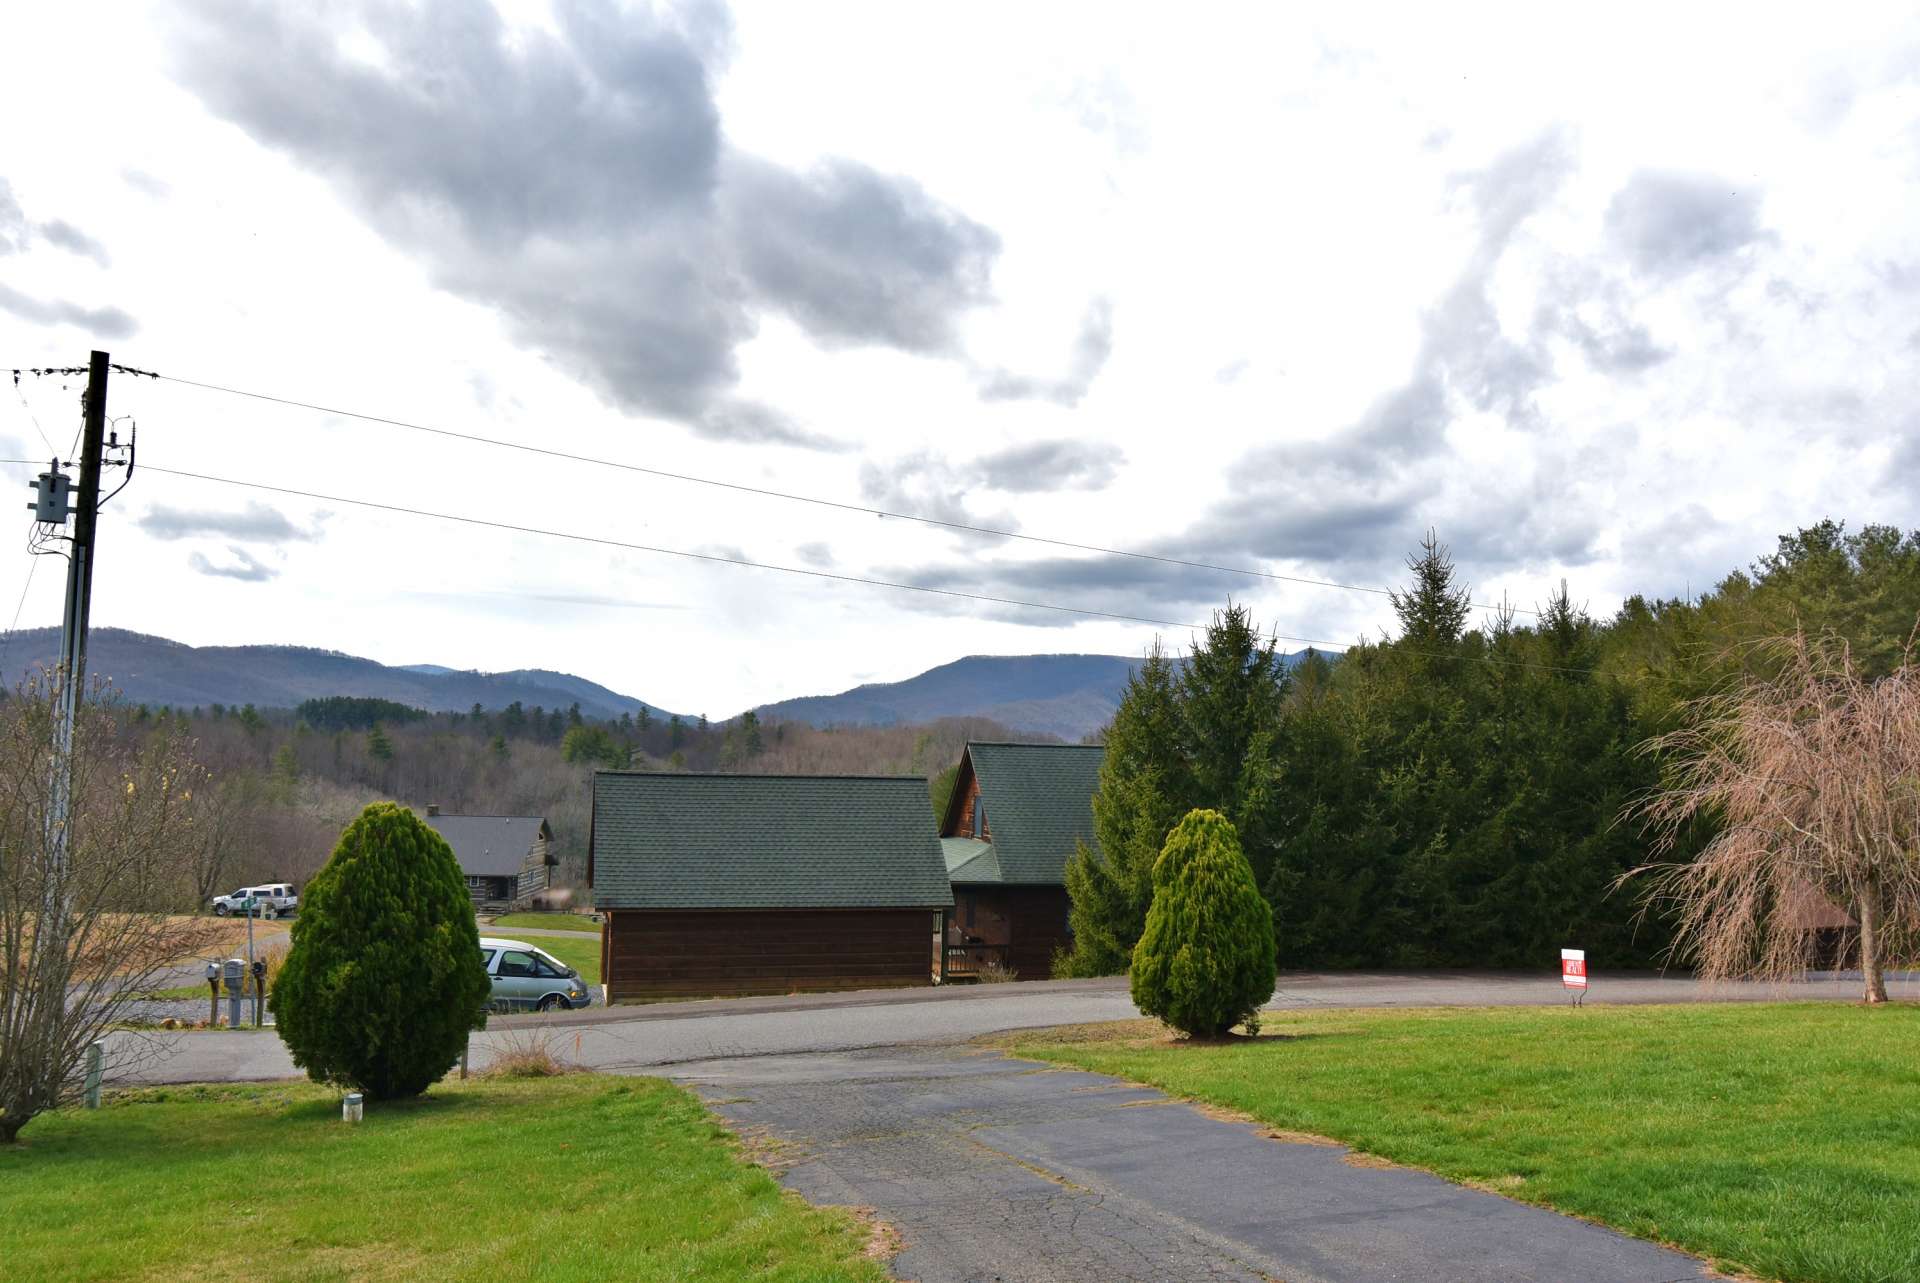 Cradled in a 1.29 acre setting in Clearview Ridge, a well established quiet community convenient to the Jeffersons, the historic New River, and the hiking and horseback riding trails of Grayson Highlands State Park.